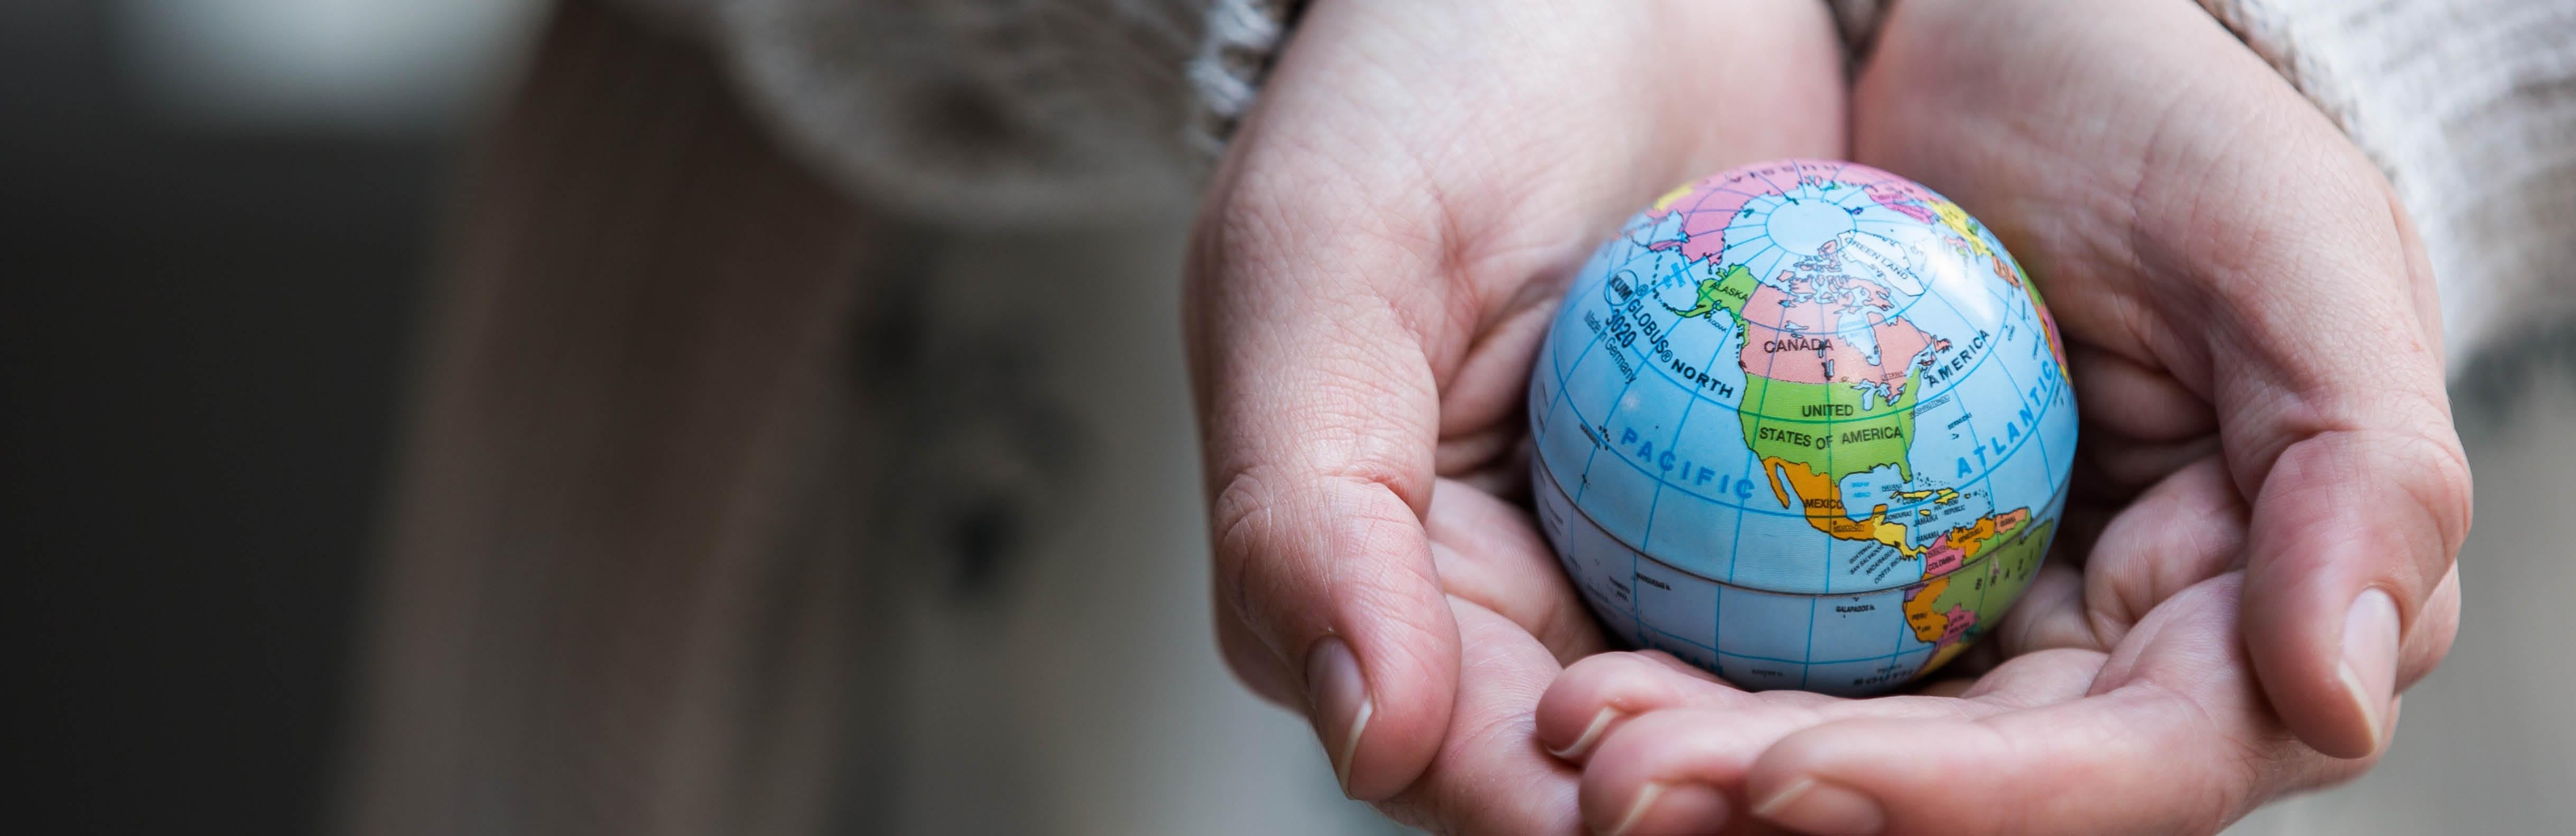 photo of hands holding small globe